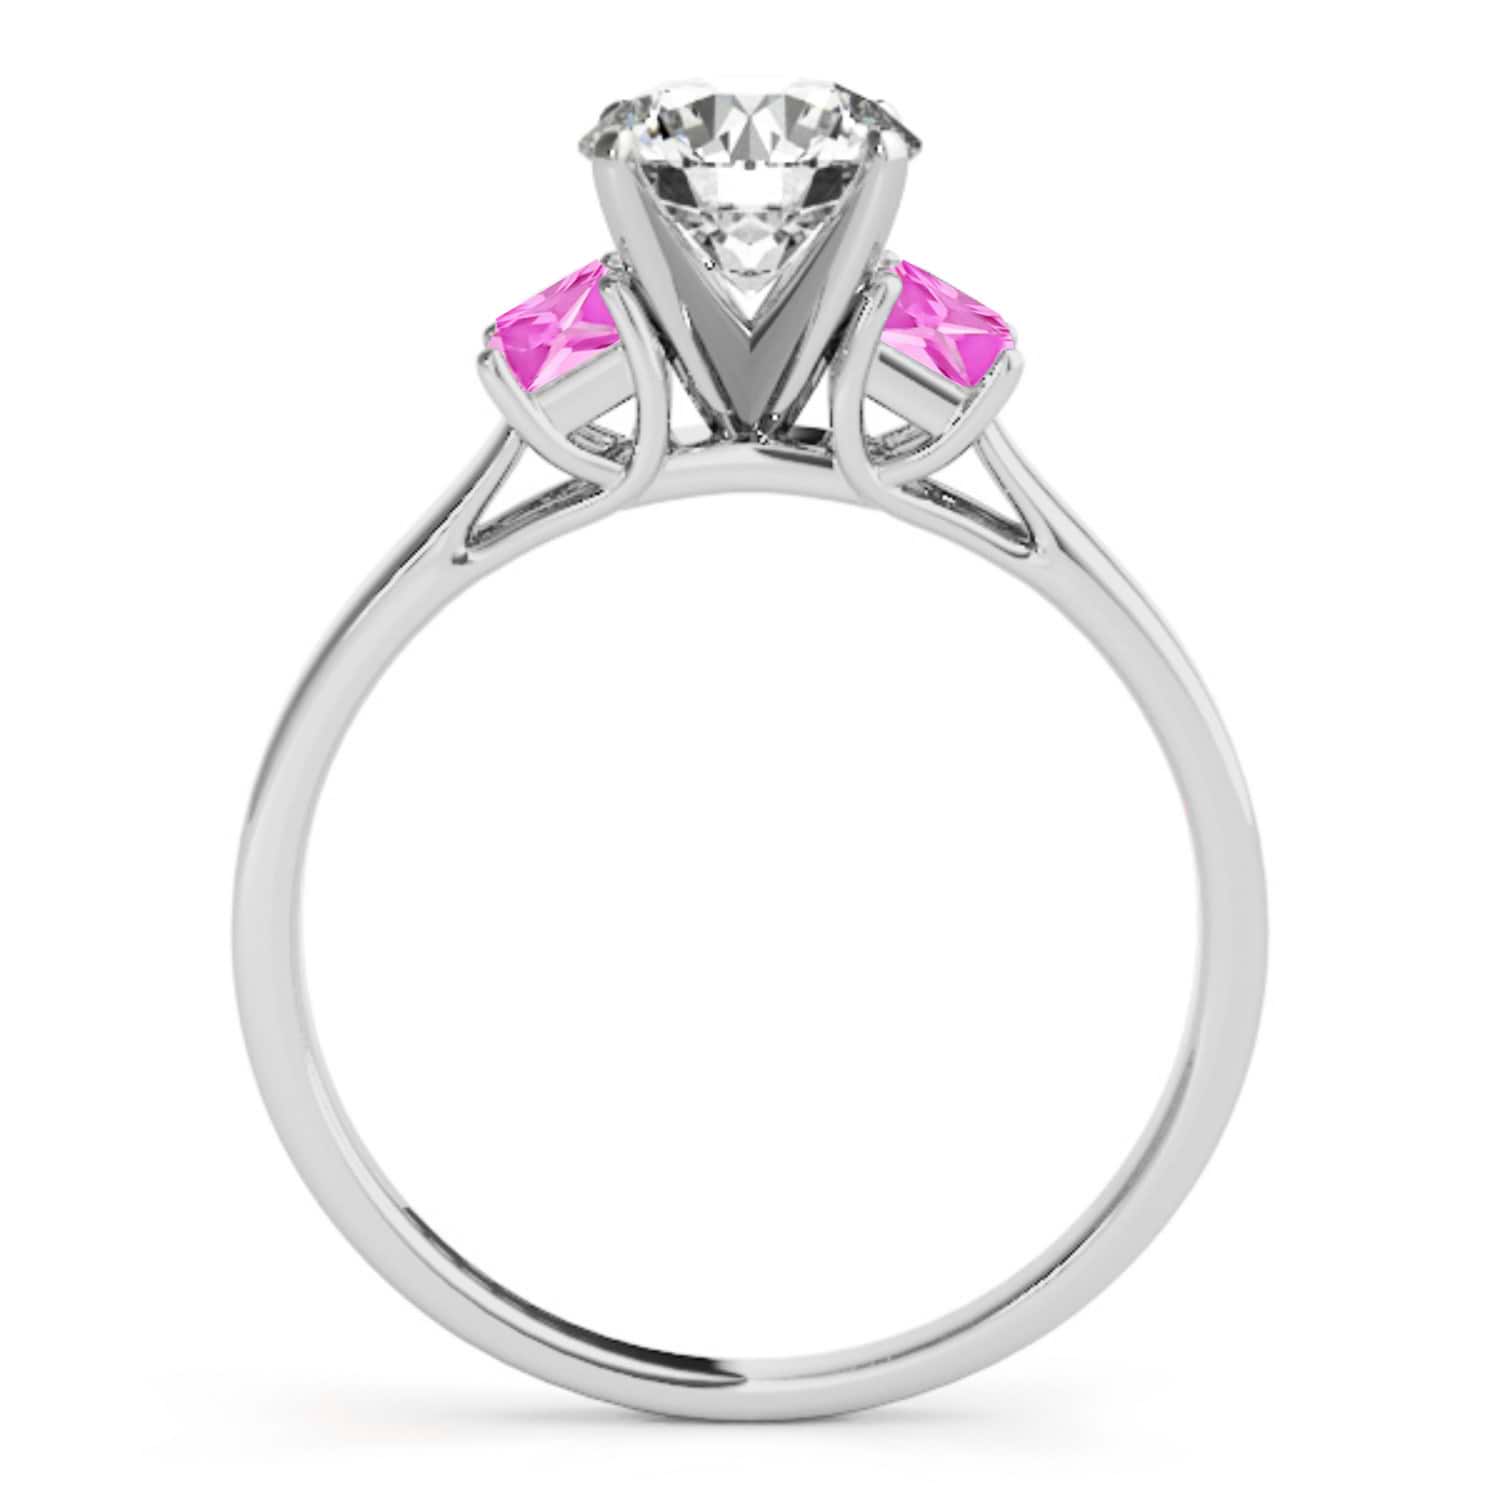 Trio Emerald Cut Pink Sapphire Engagement Ring 14k White Gold (0.30ct)